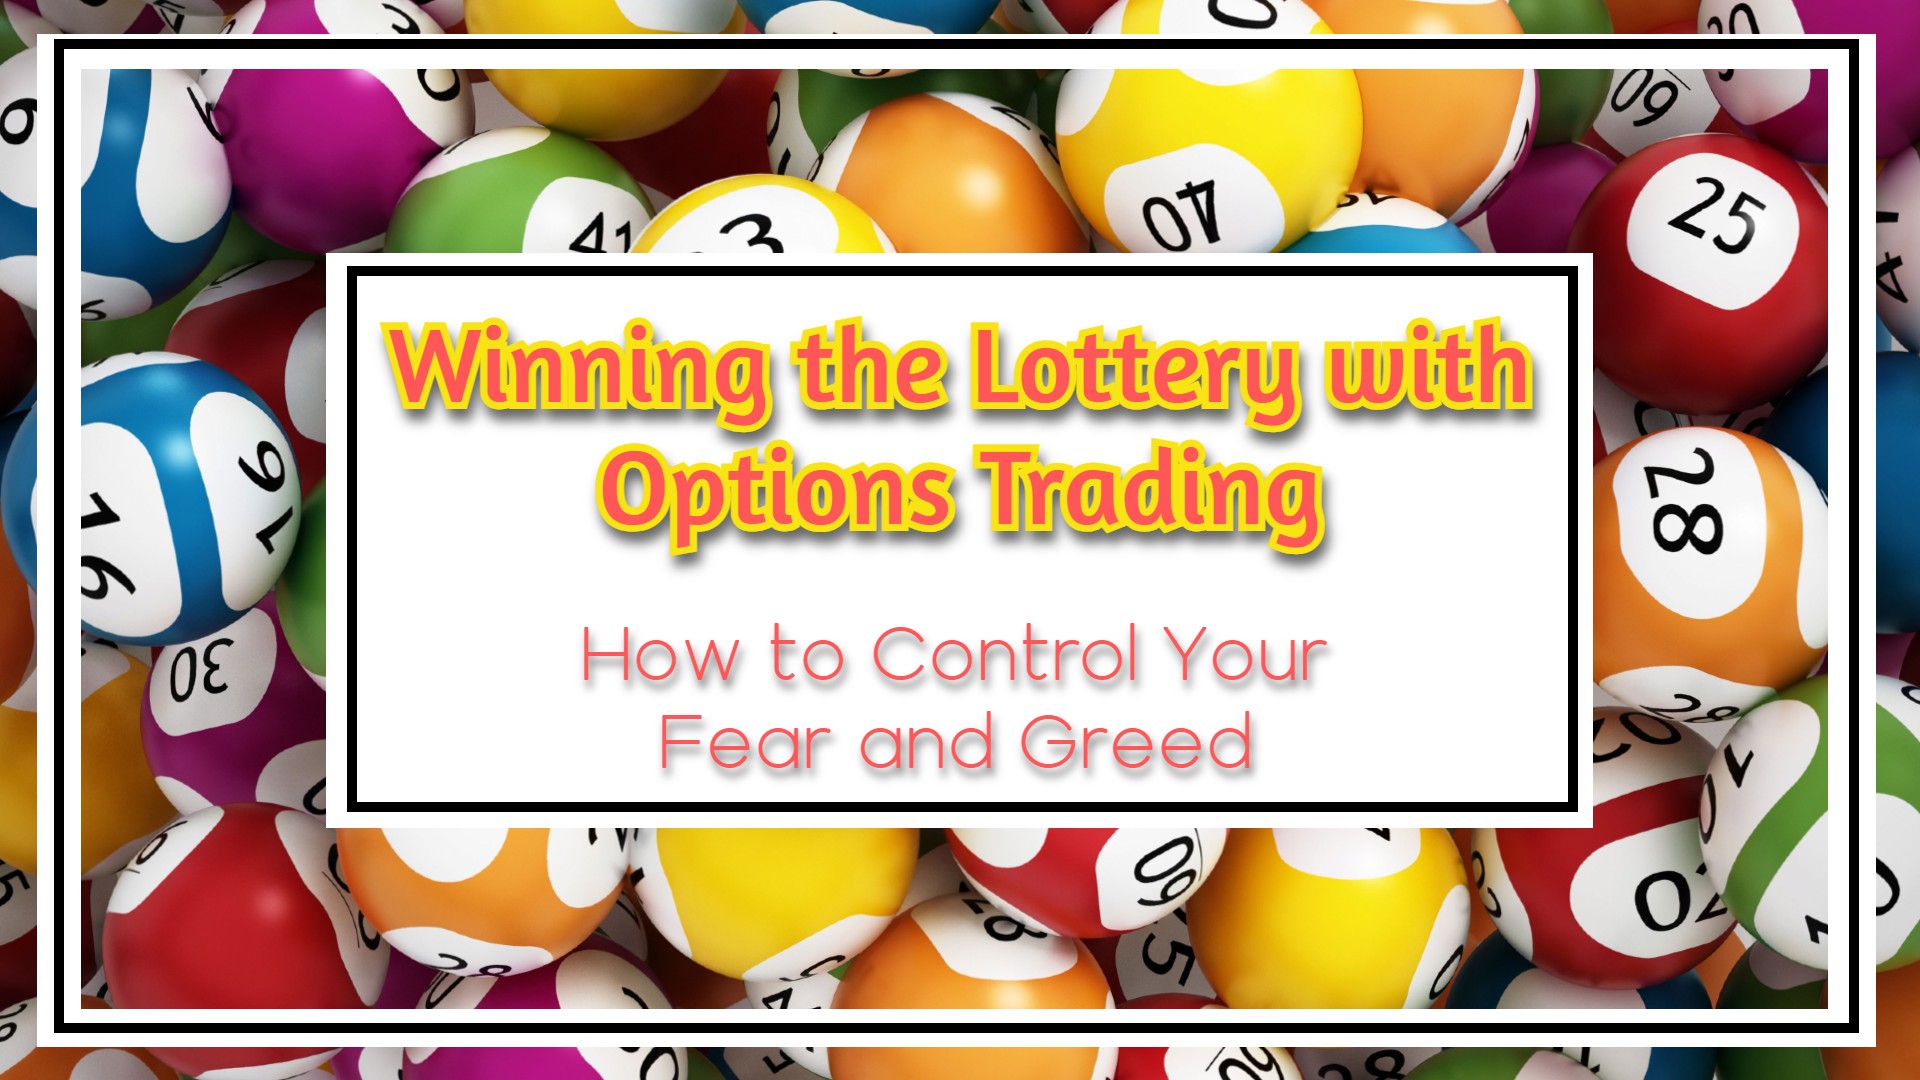 Winning the Lottery with Options Trading: How to Control Your Fear and Greed